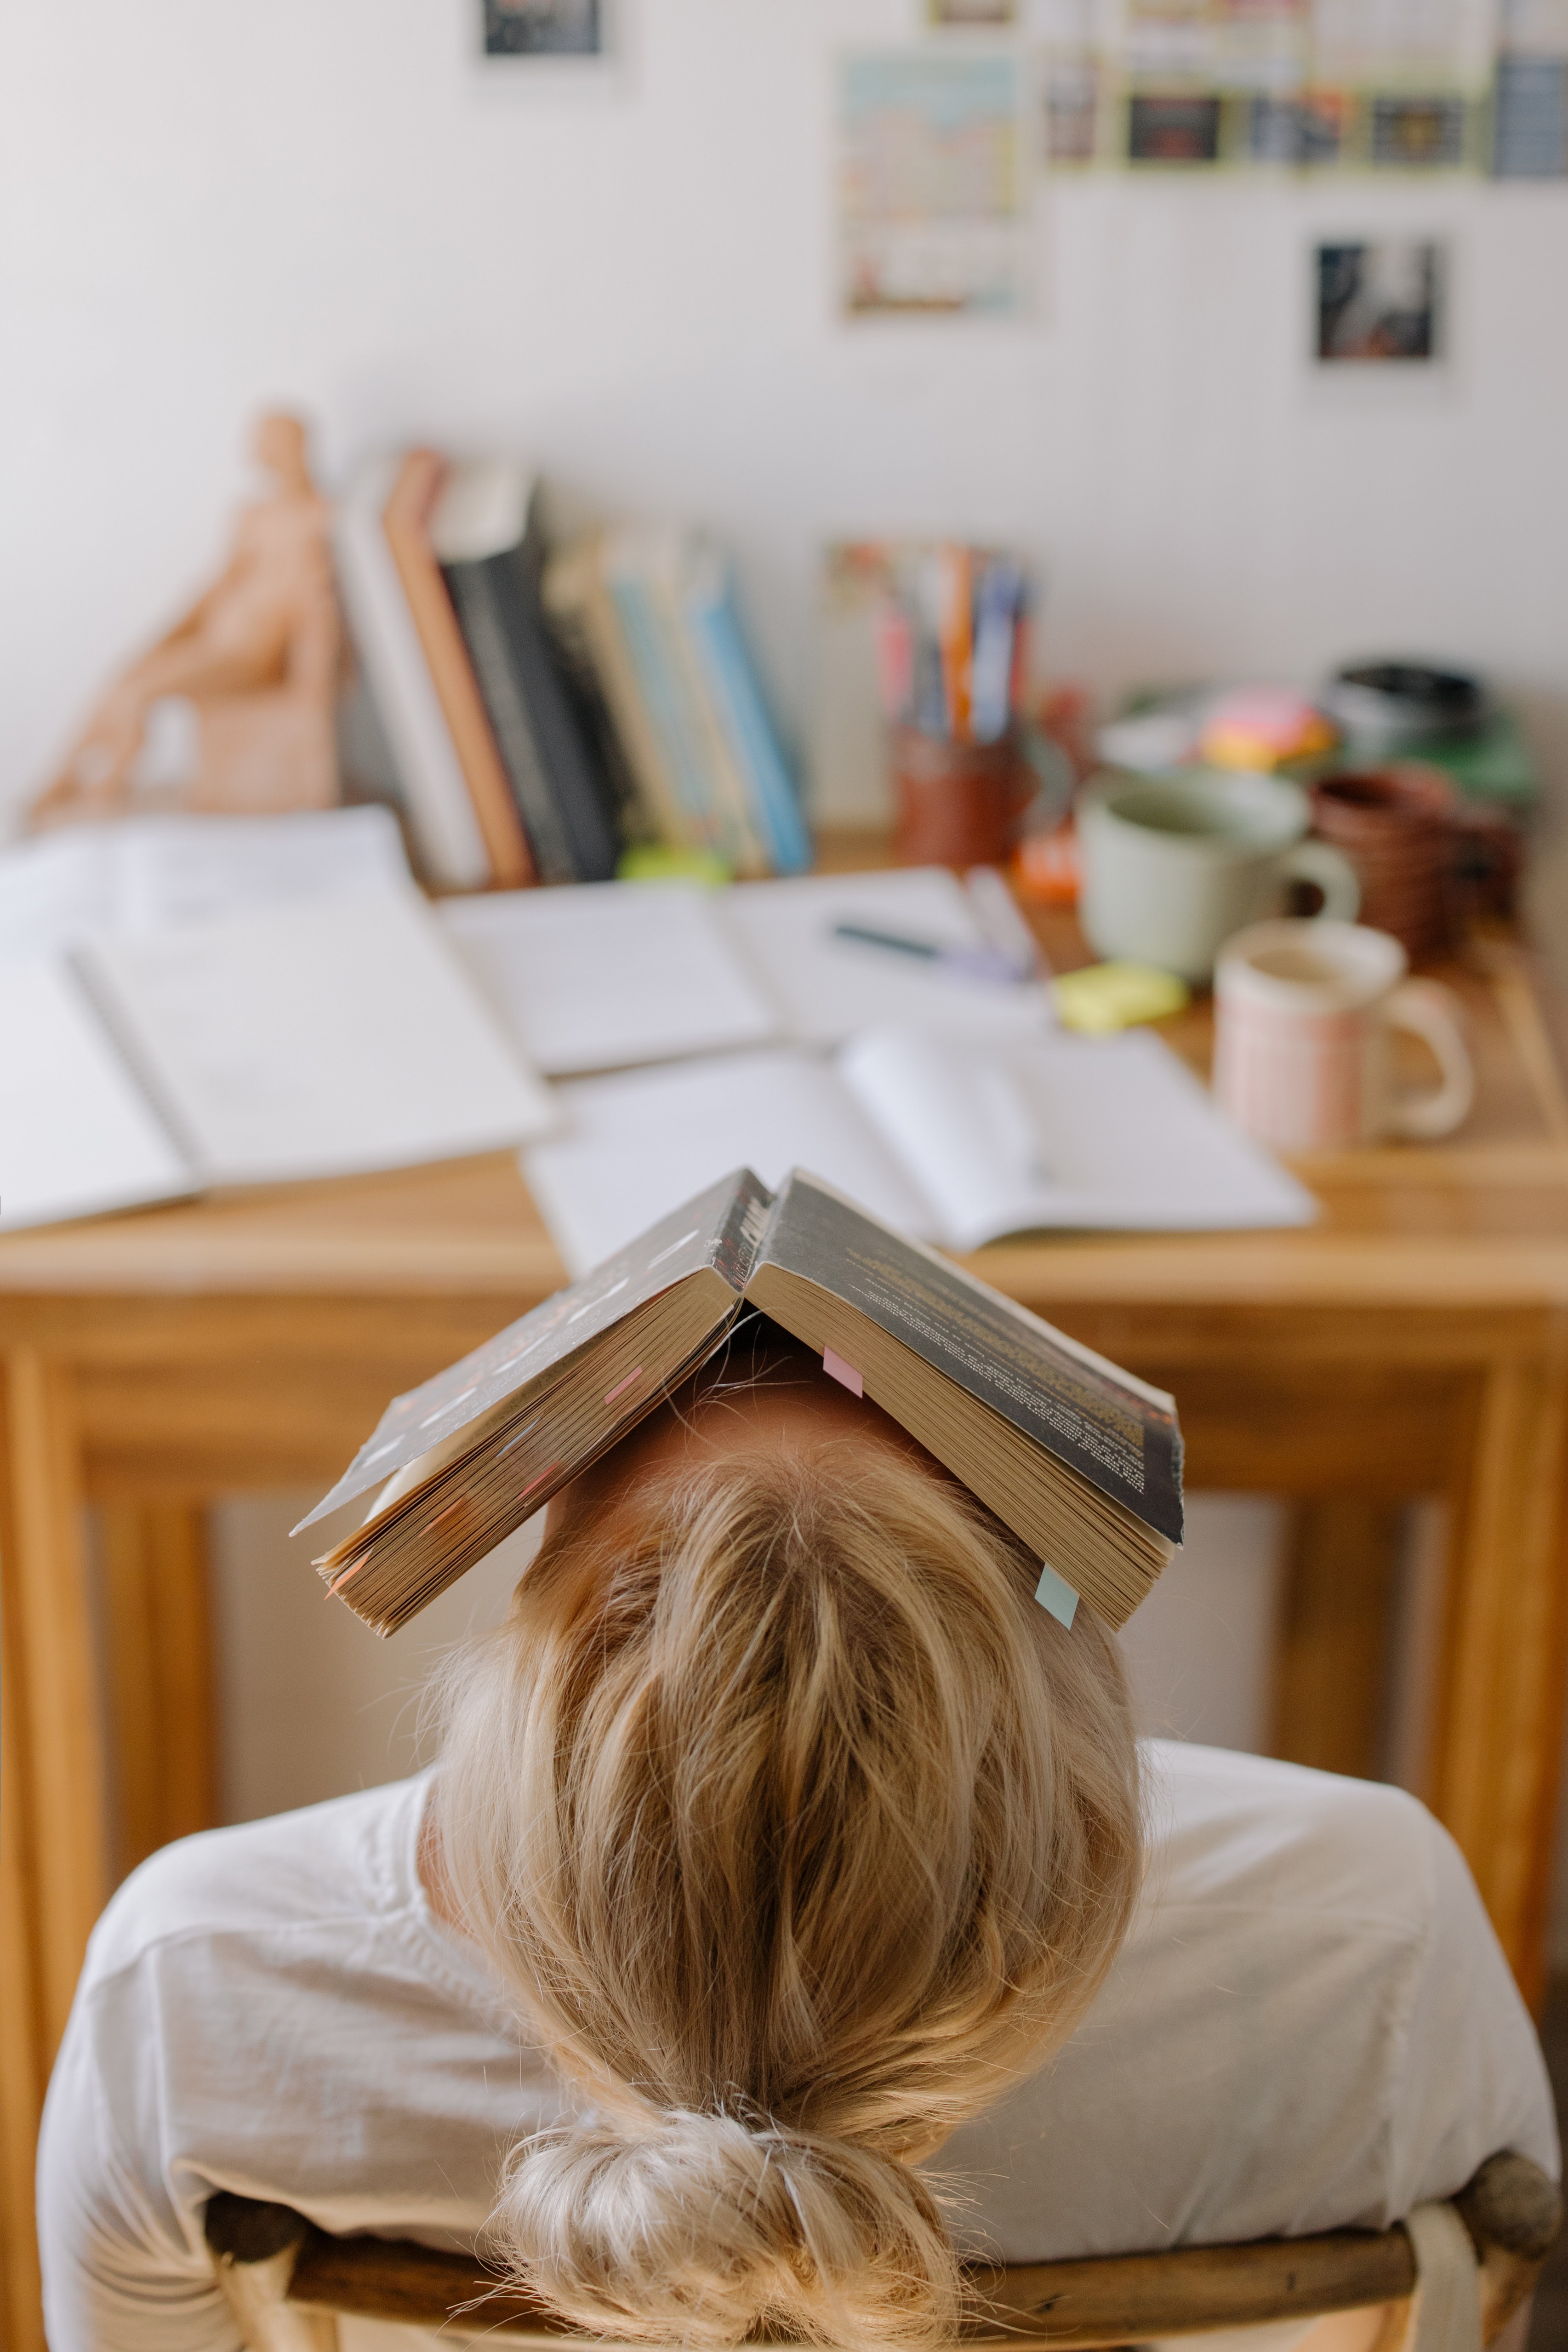 A student sitting in a chair with a book over her face